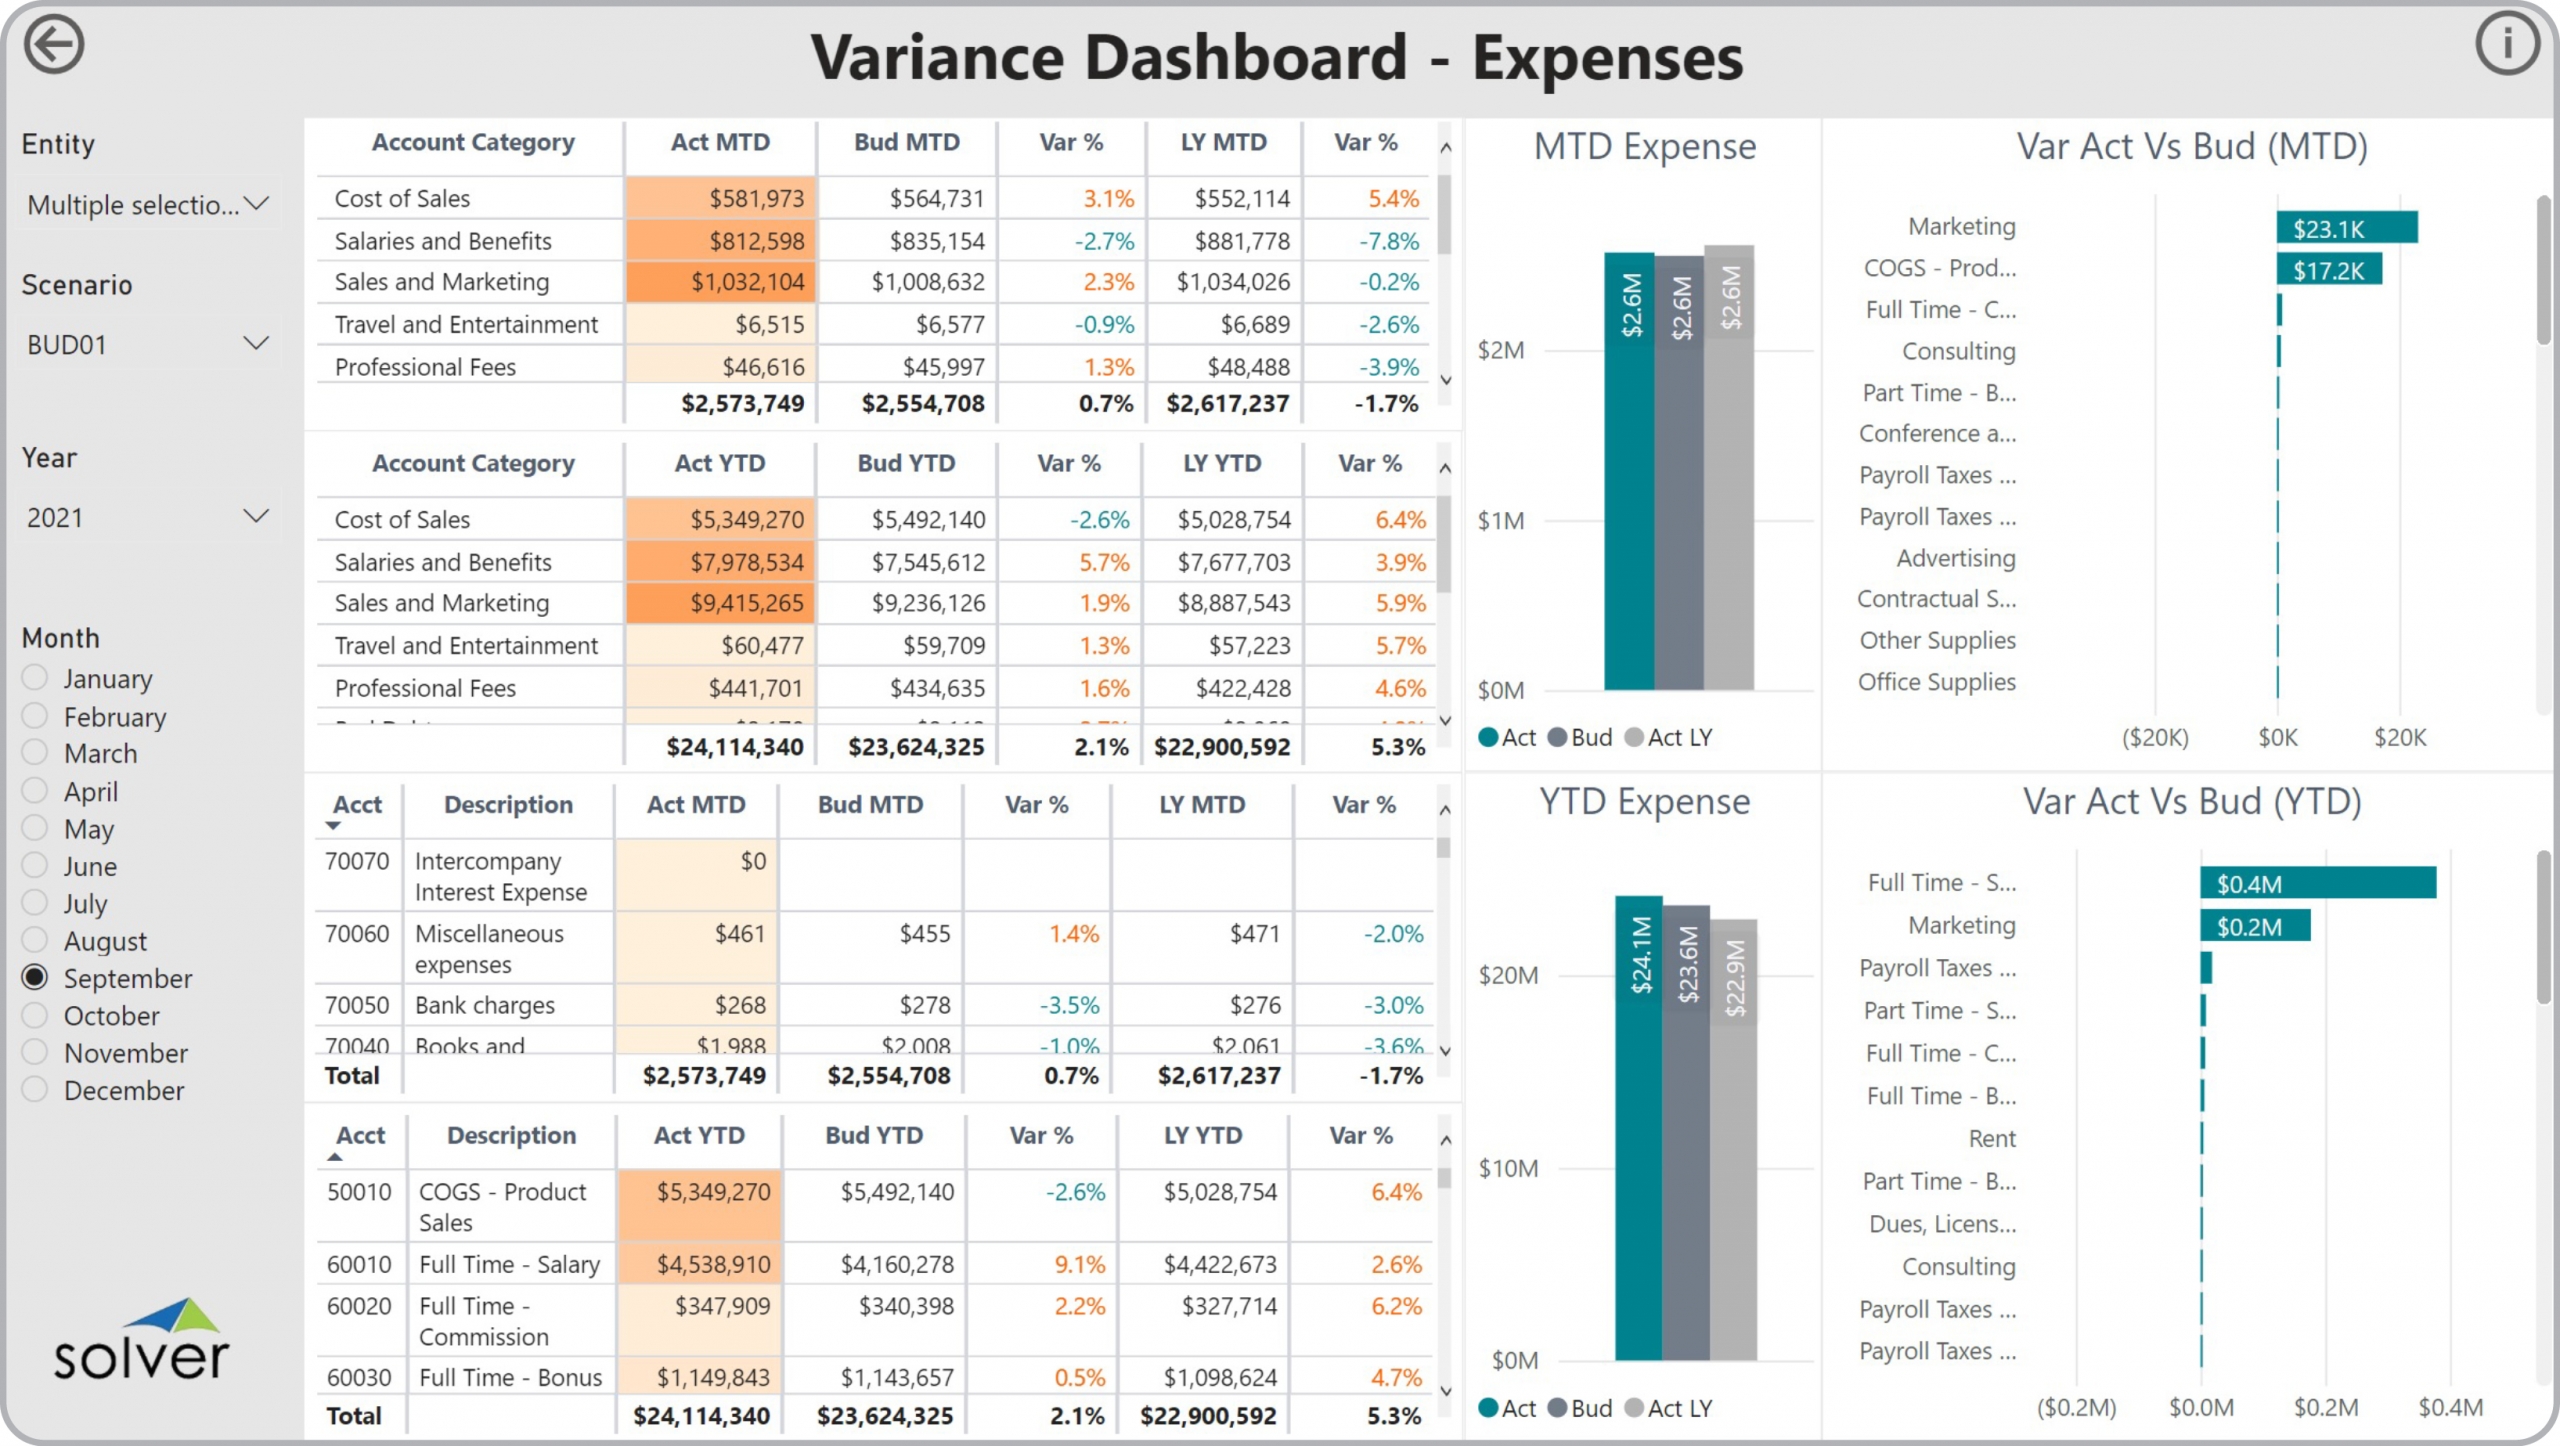 Example of an Expense Variance Dashboard to Streamline the Monthly Analysis Process